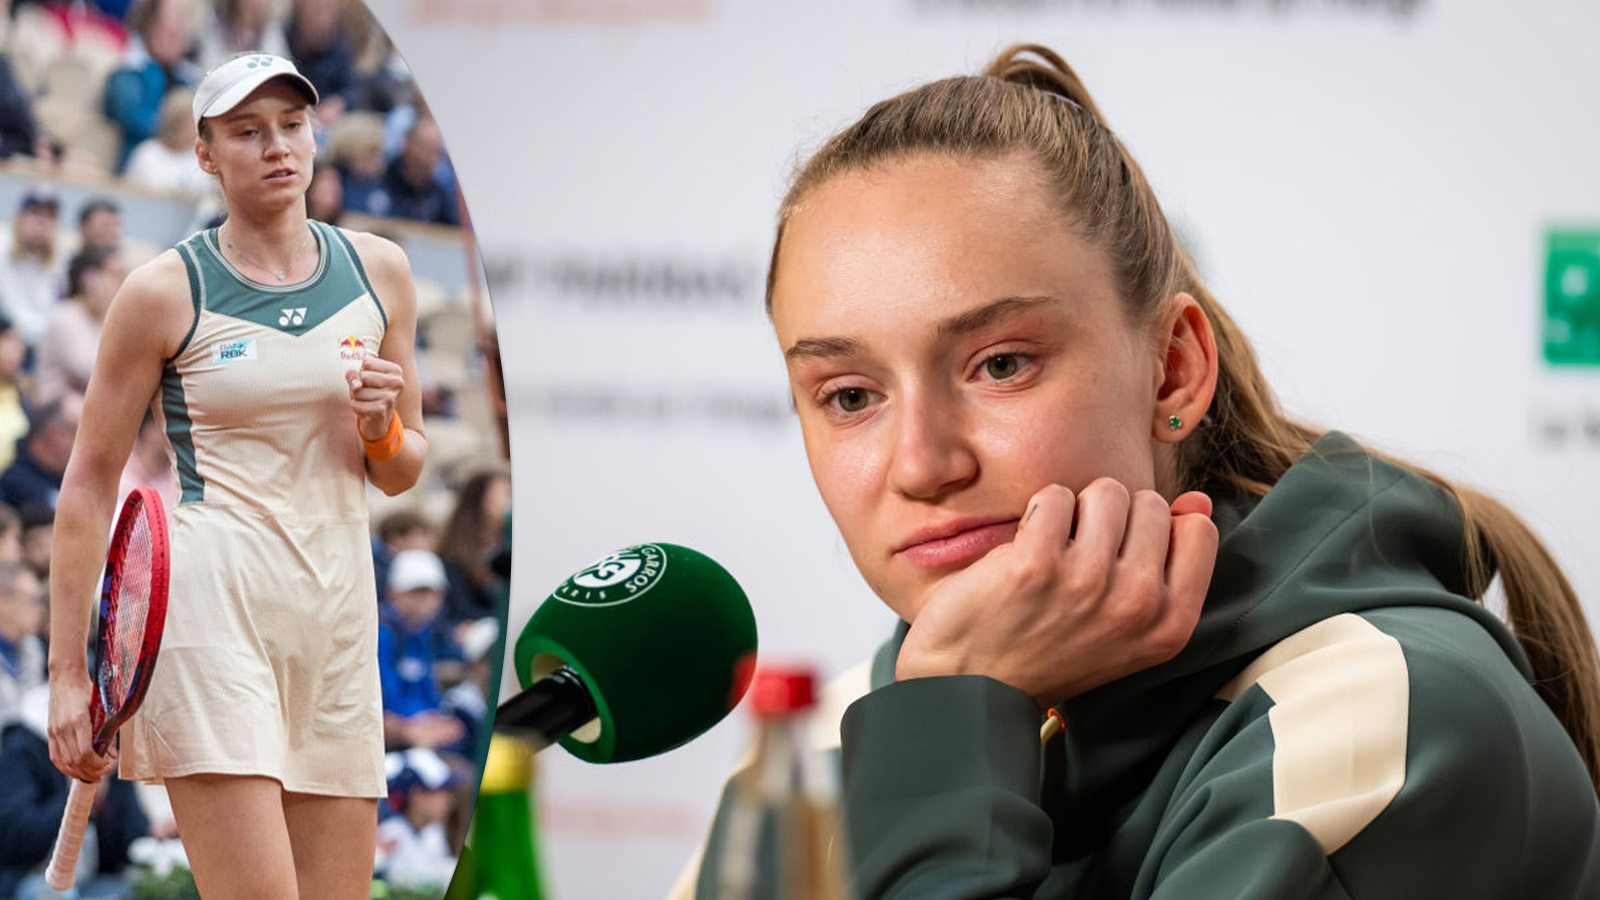 French Open Gets Feisty As No. 4 Tennis Player Eviscerates Media